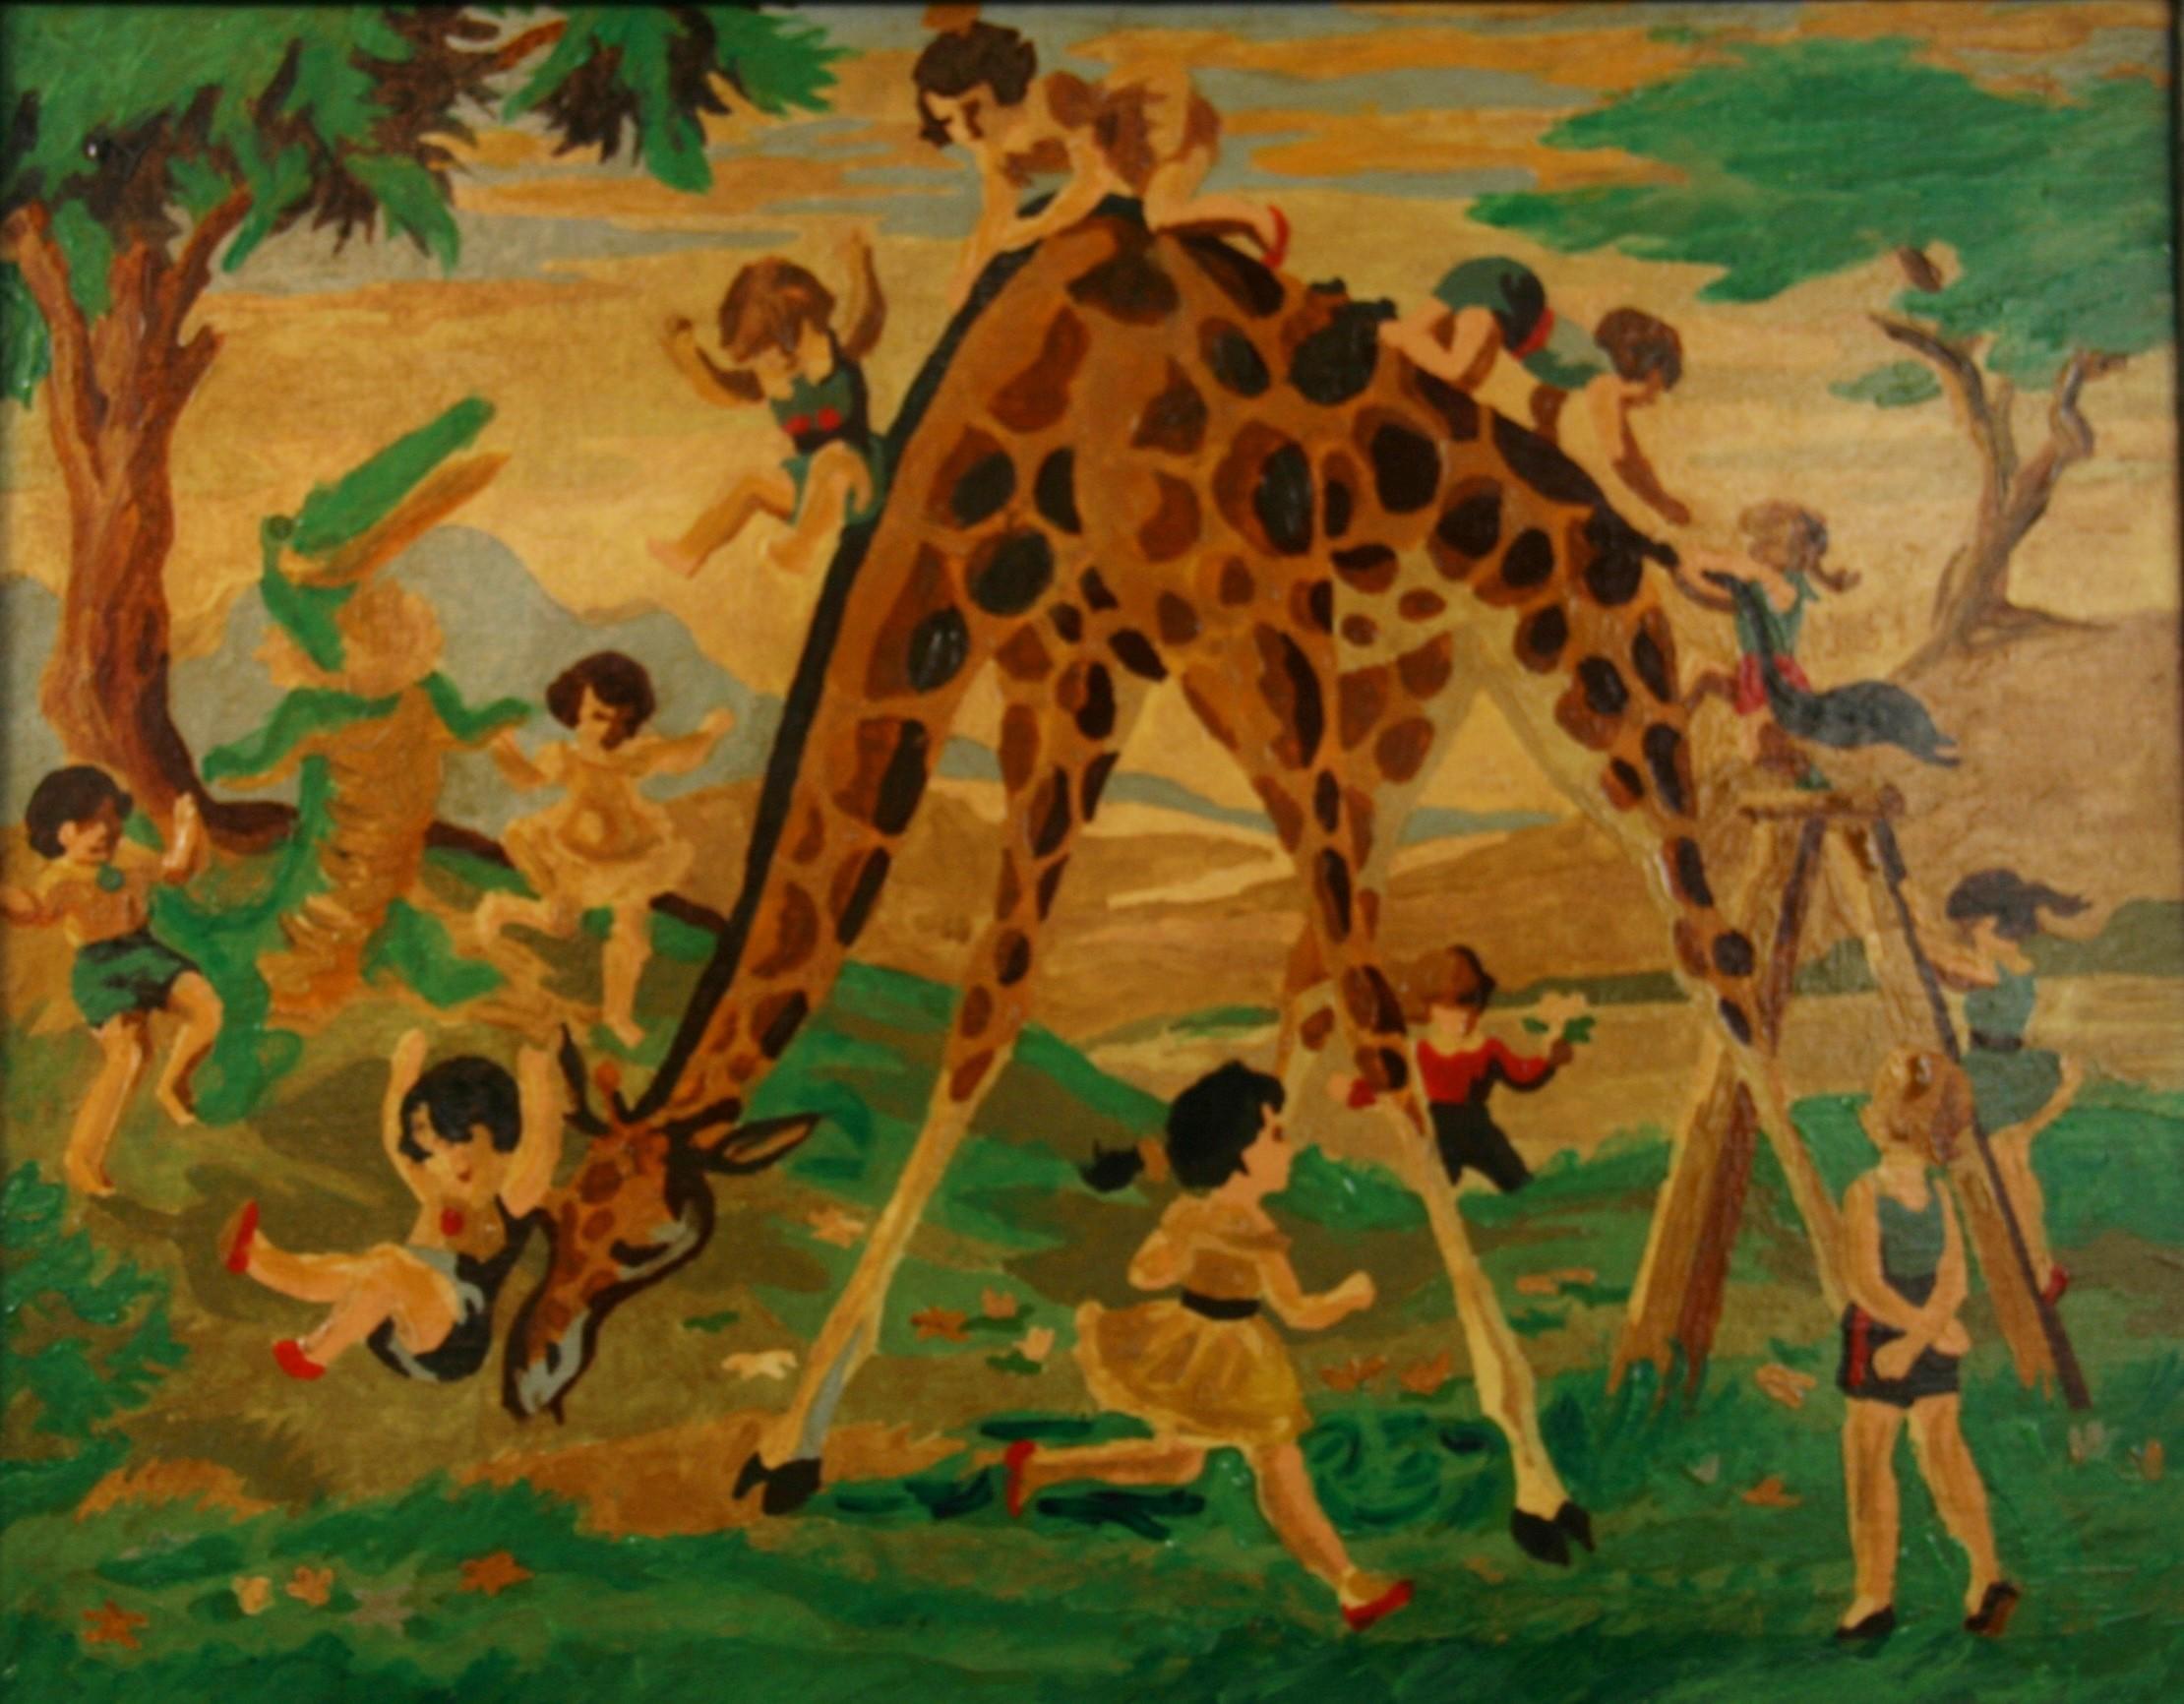 Unknown Figurative Painting - Riding a Giraffe Surreal  Oil Painting 1956